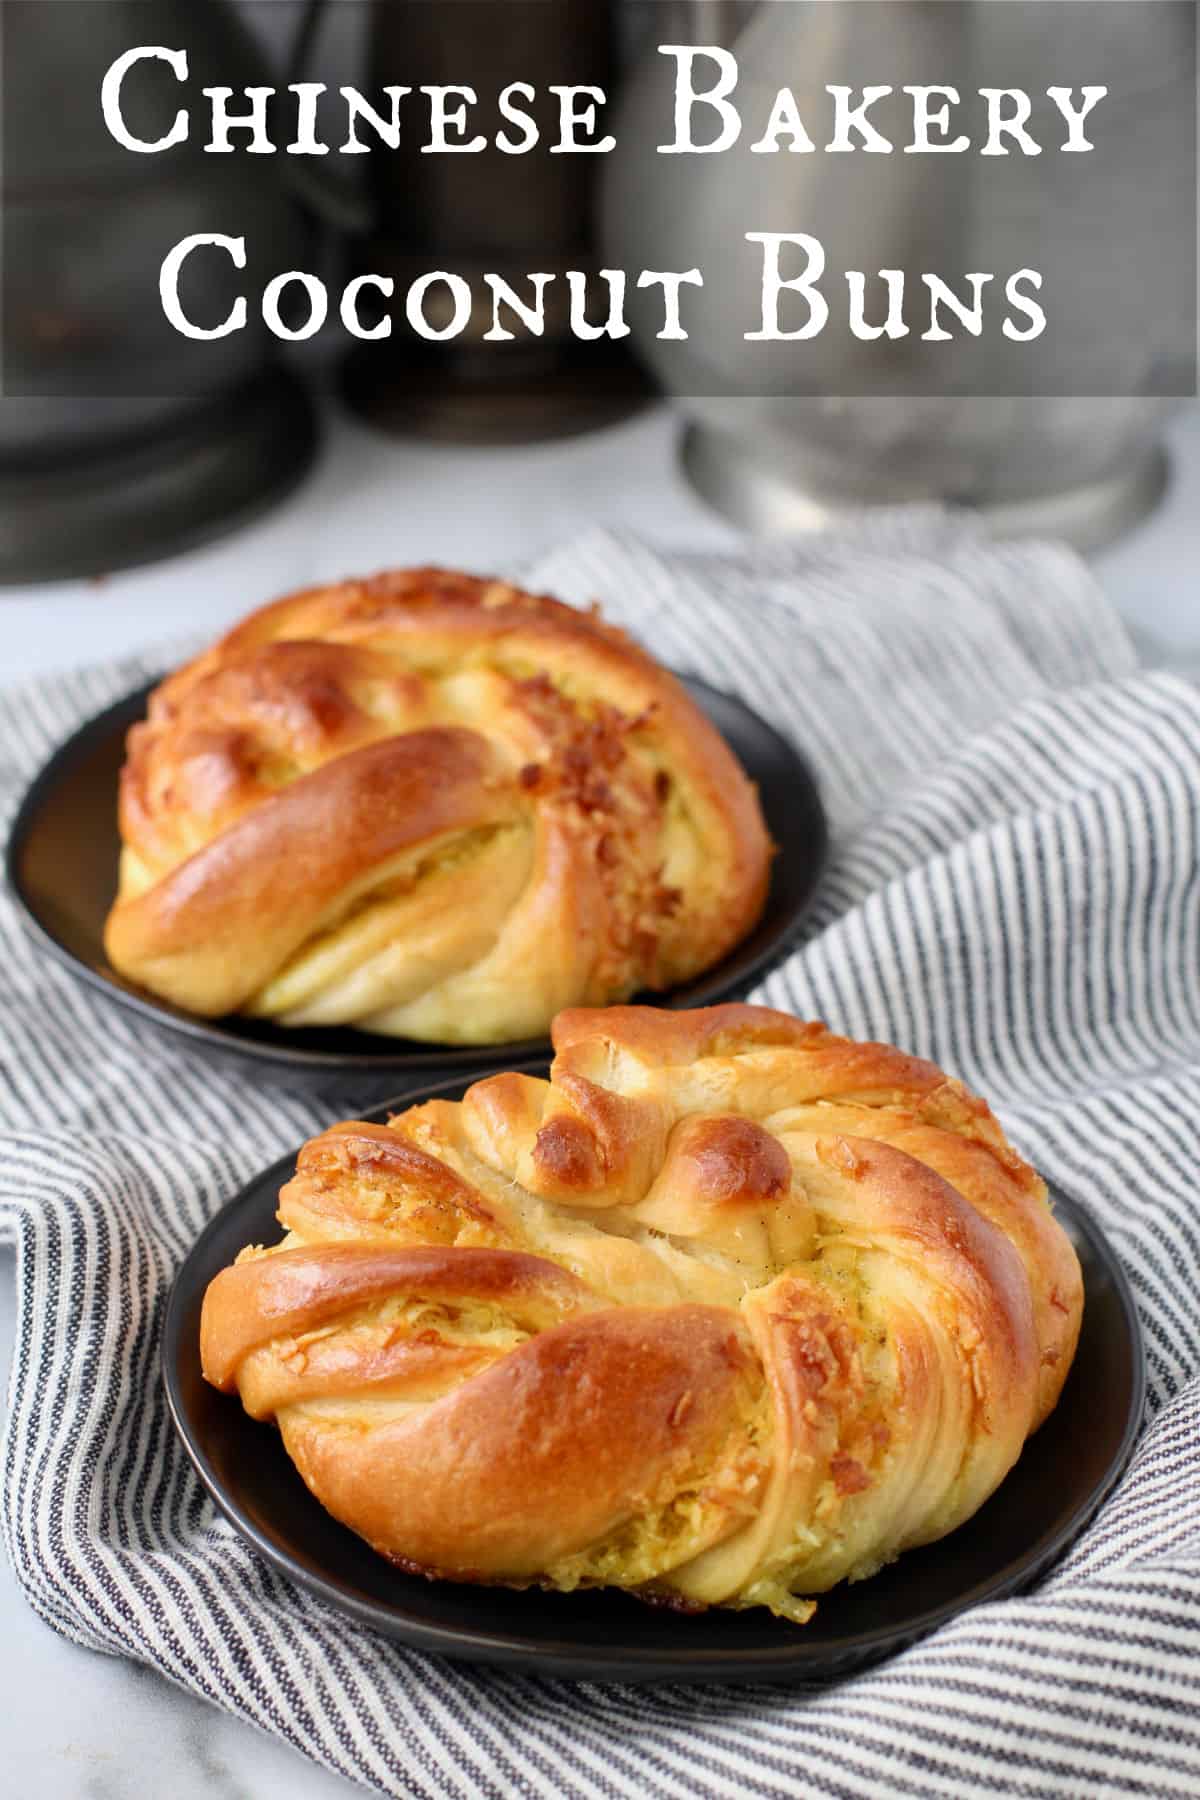 Hong Kong-Style Inside Out Coconut Buns